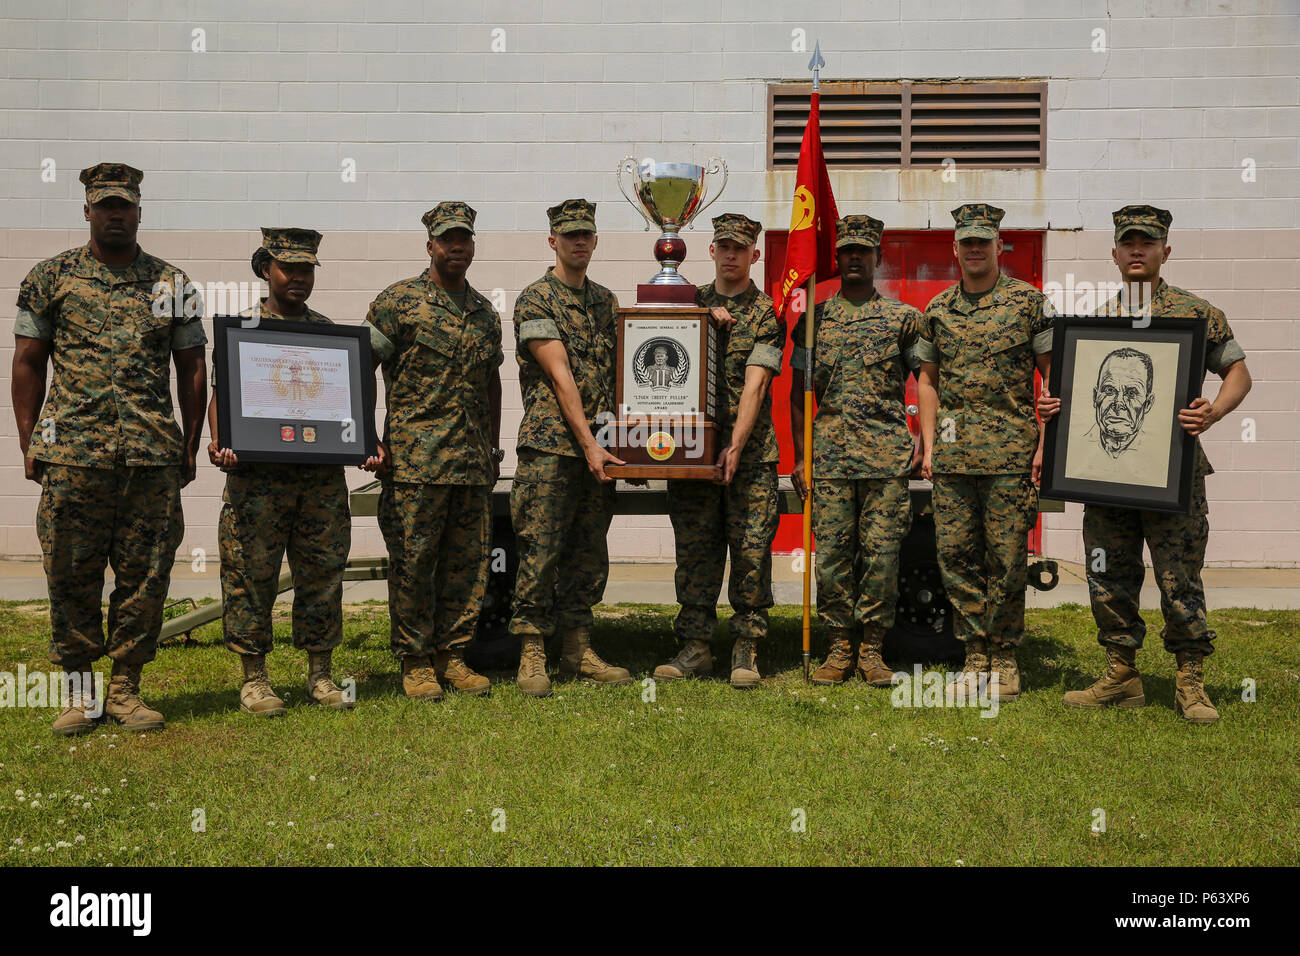 Marines with 2nd Maintenance Battalion pose with the Chesty Puller Award trophy during a ceremony to honor and acknowledge their outstanding performance, at Camp Lejeune, N.C., April 21, 2016. The battalion earned this award for exceptional professional ability, superior performance and dedication to supporting the mission of II MEF. (U.S. Marine Corps photo by Lance Cpl. Aaron K. Fiala/released) Stock Photo